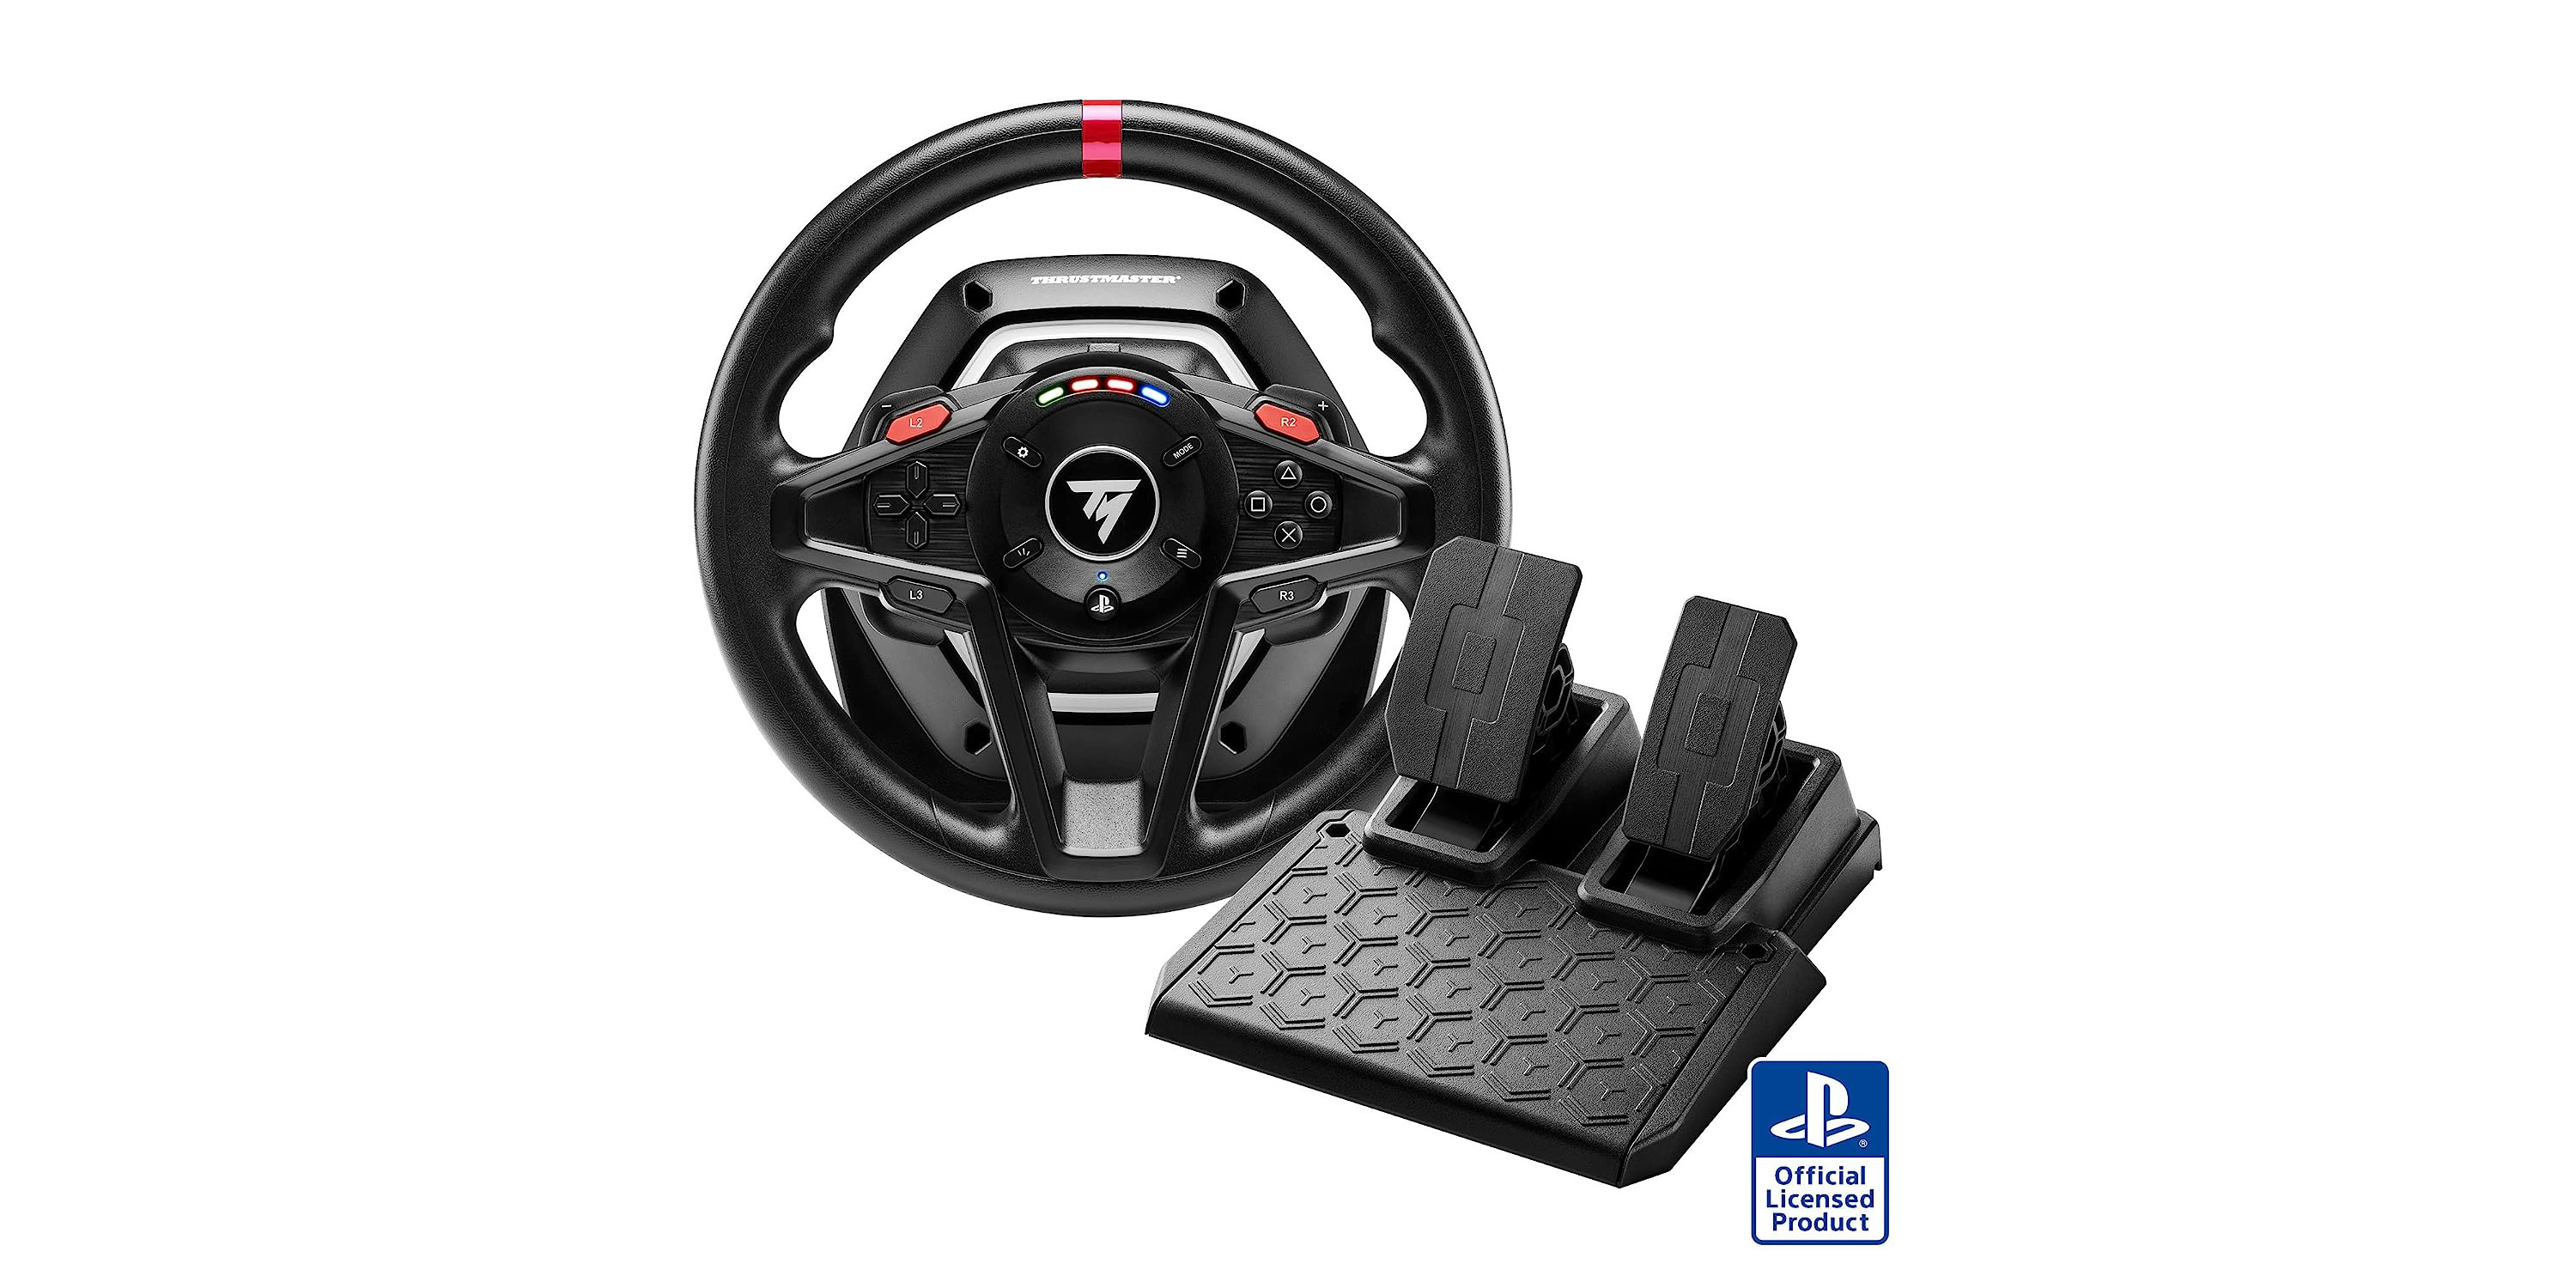 Racing Wheel Overdrive Designed for Xbox Series X|S By HORI - Officially  Licensed by Microsoft